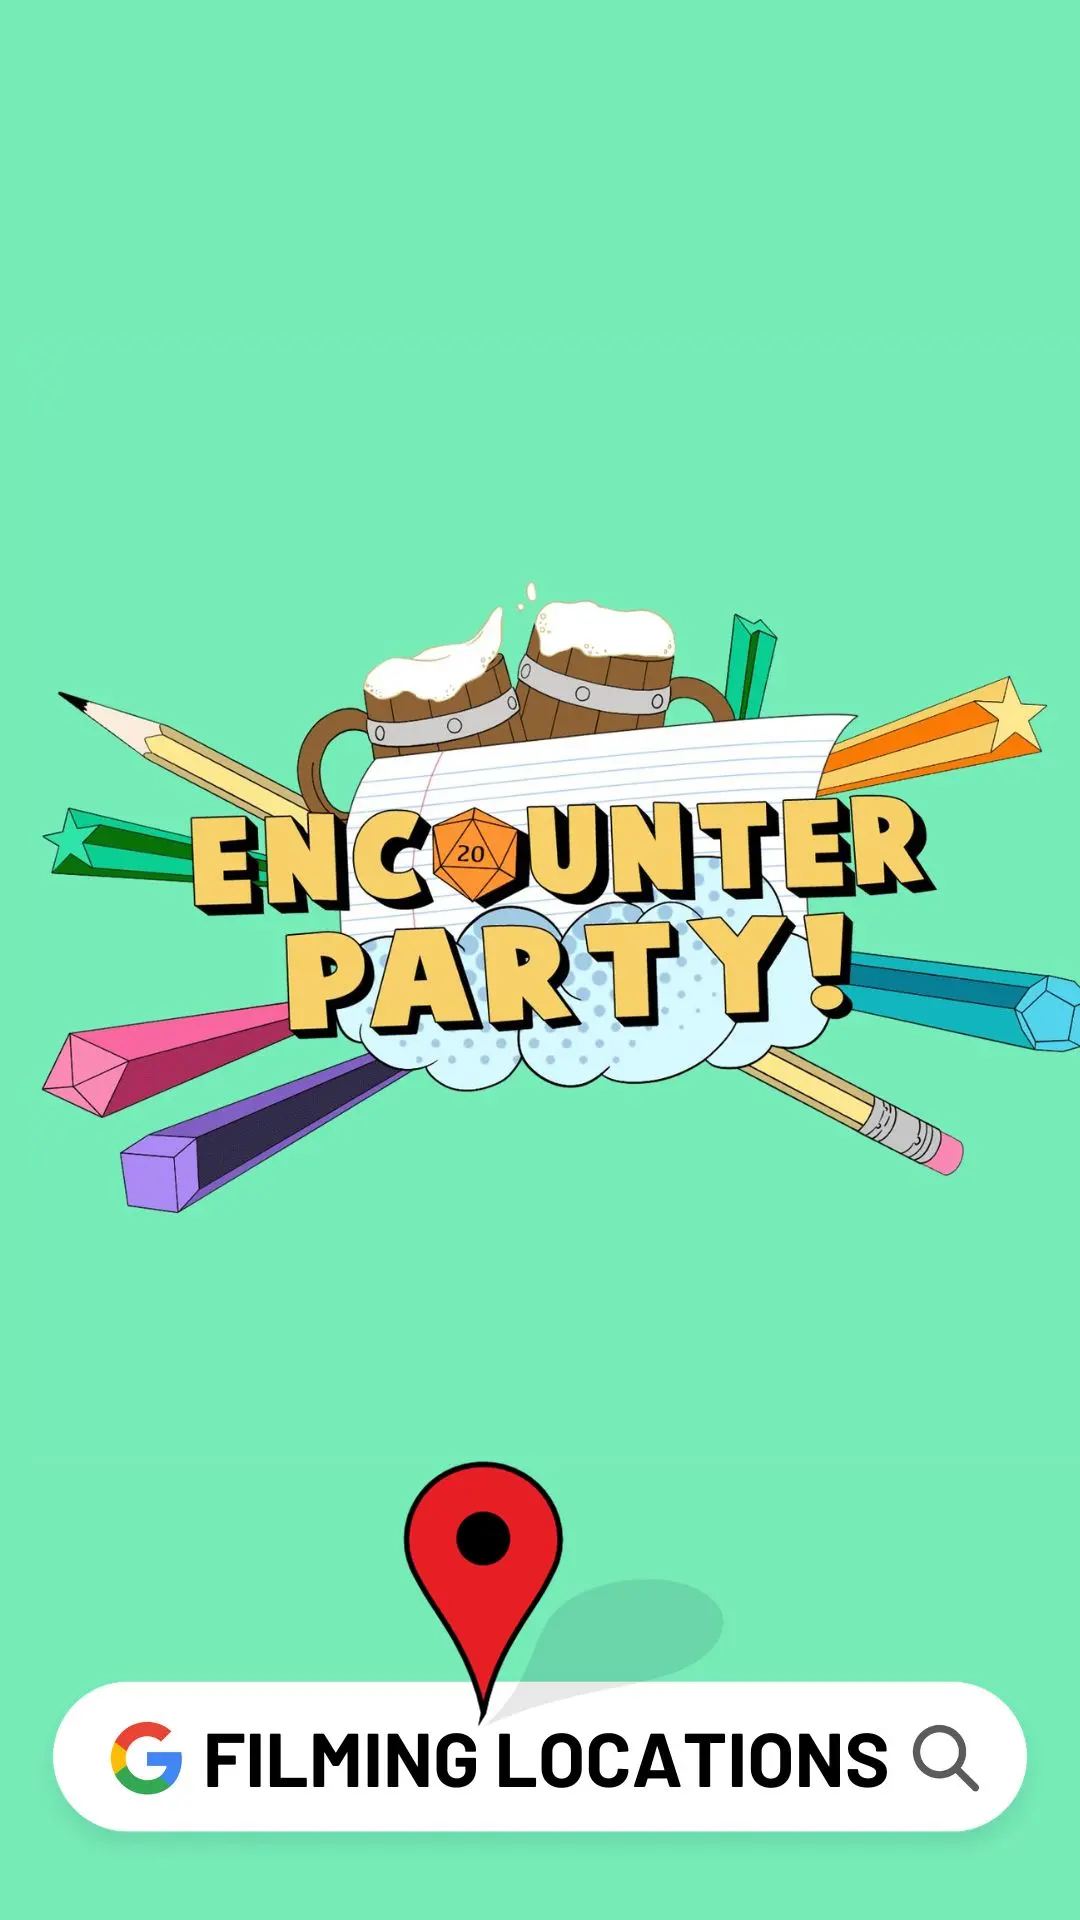 Encounter Party Filming Locations